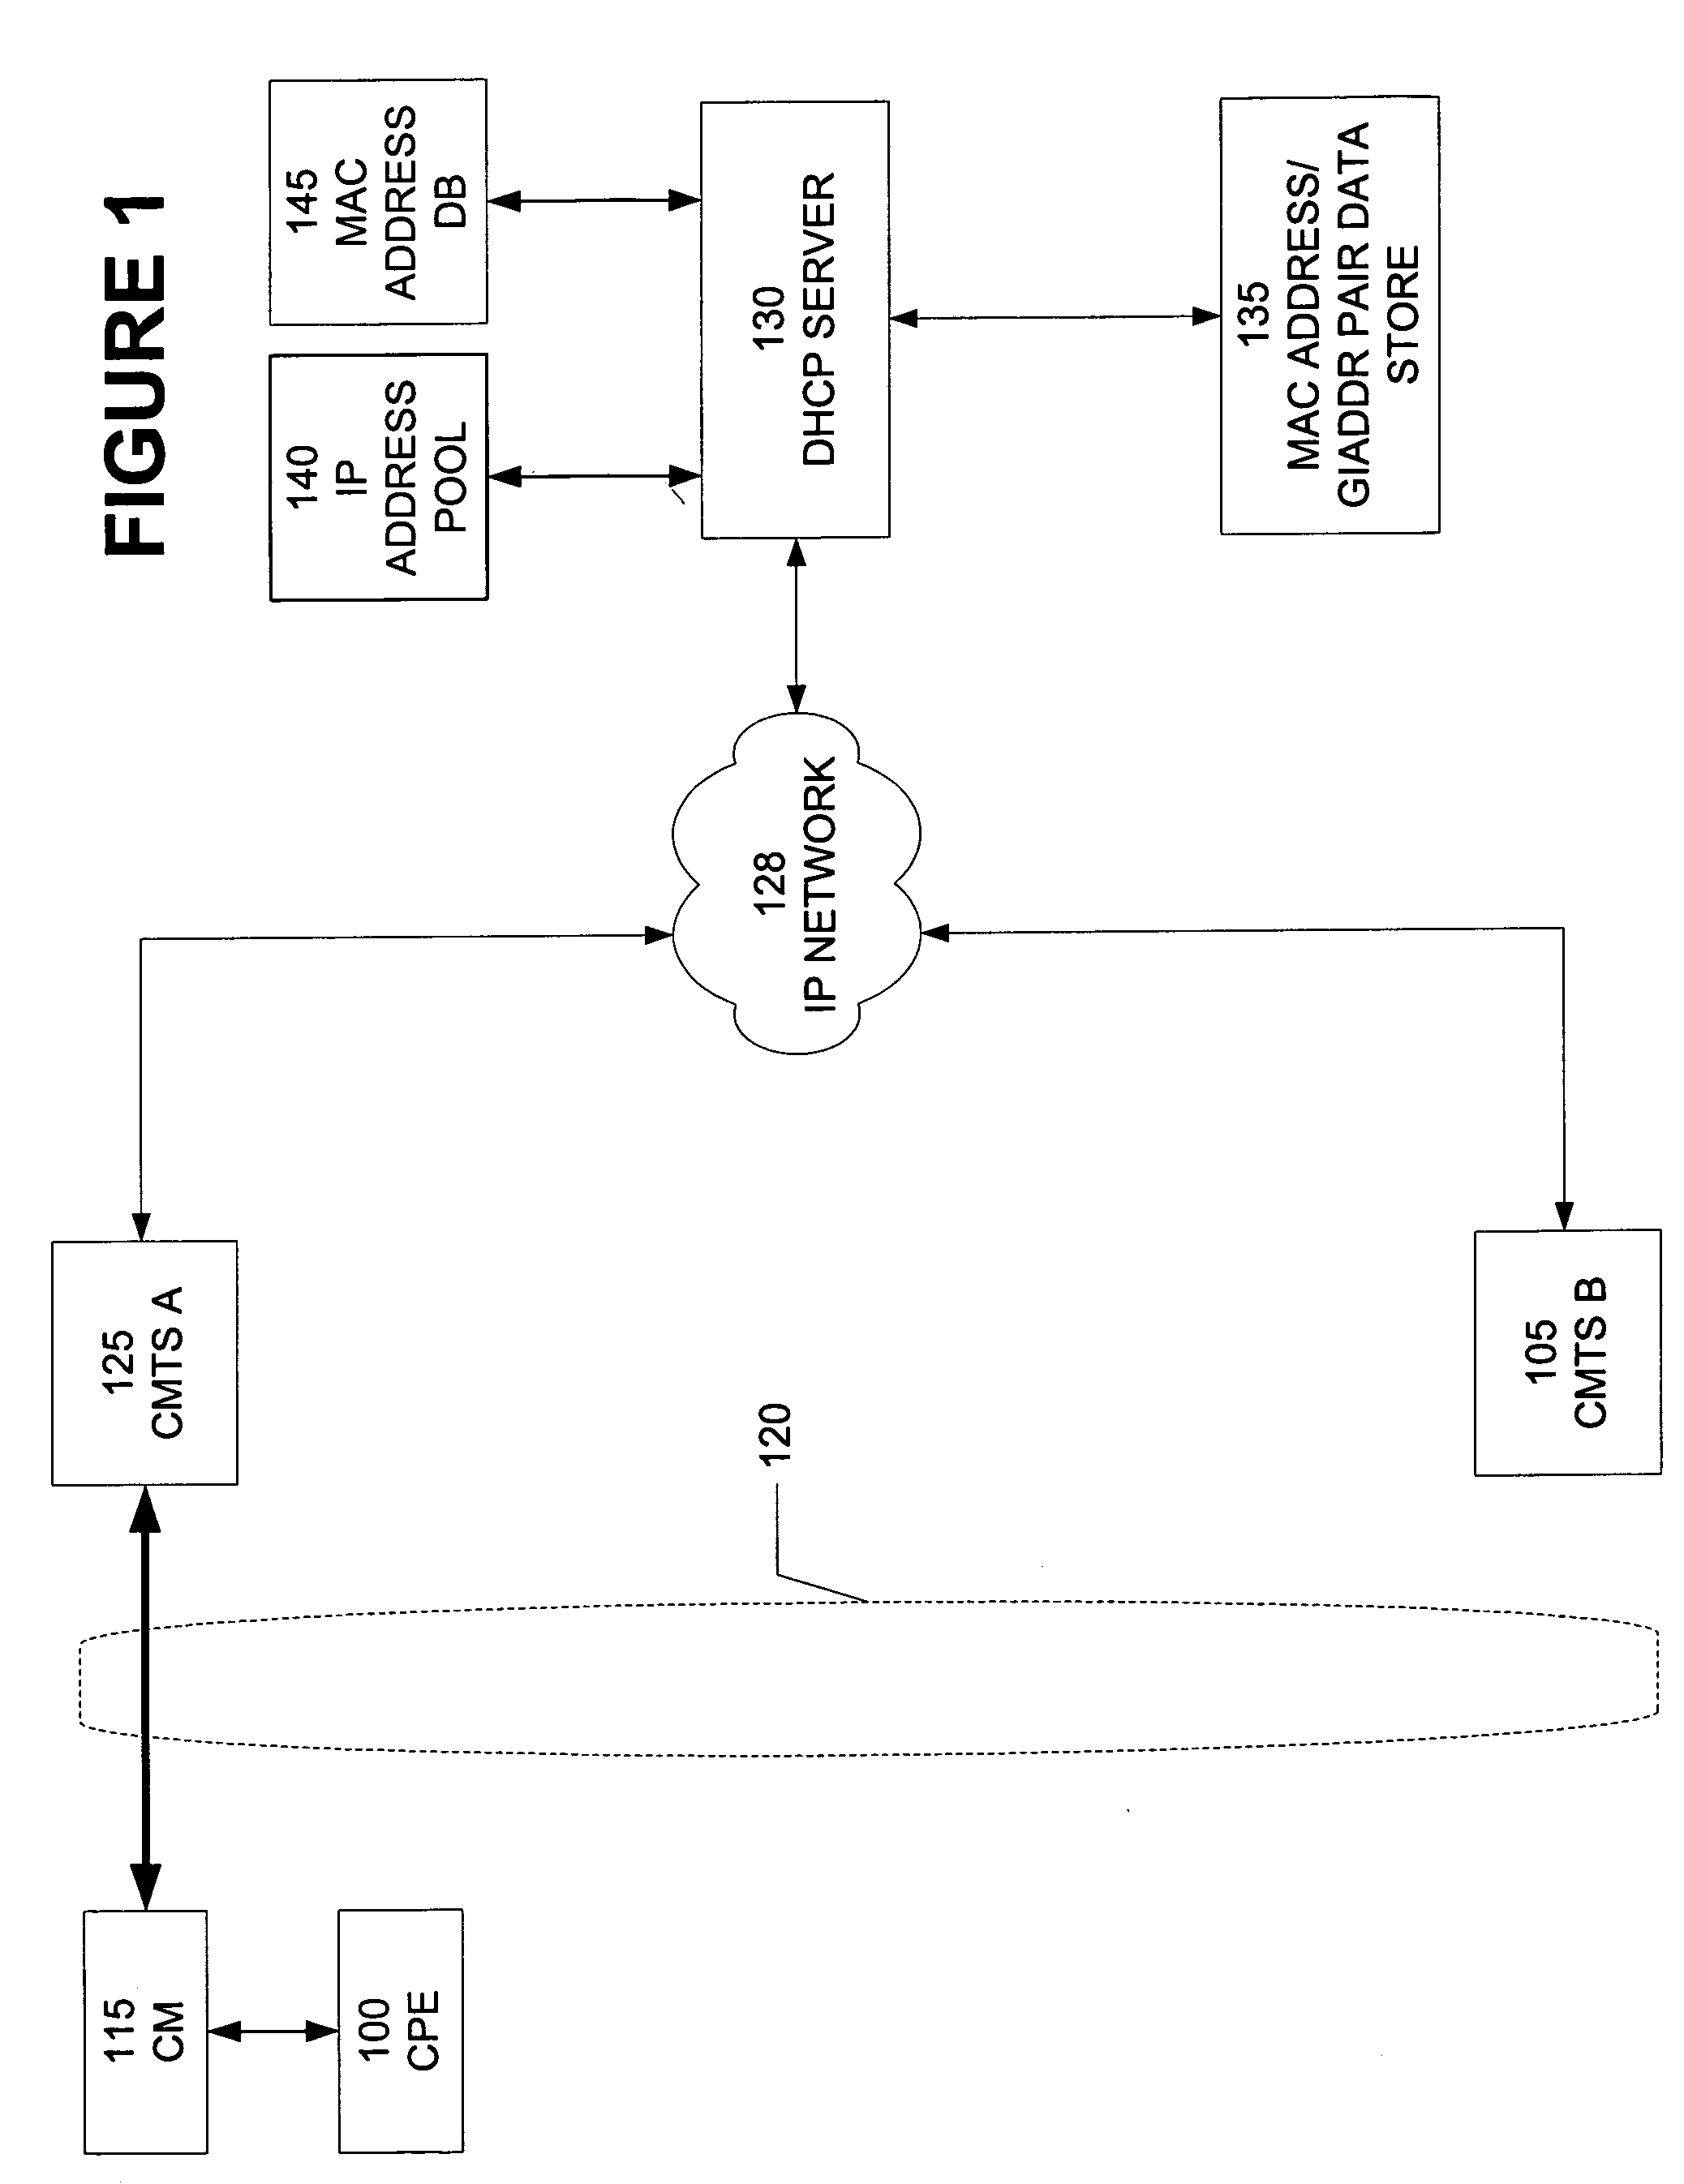 System and method for detecting and reporting cable modems with duplicate media access control addresses